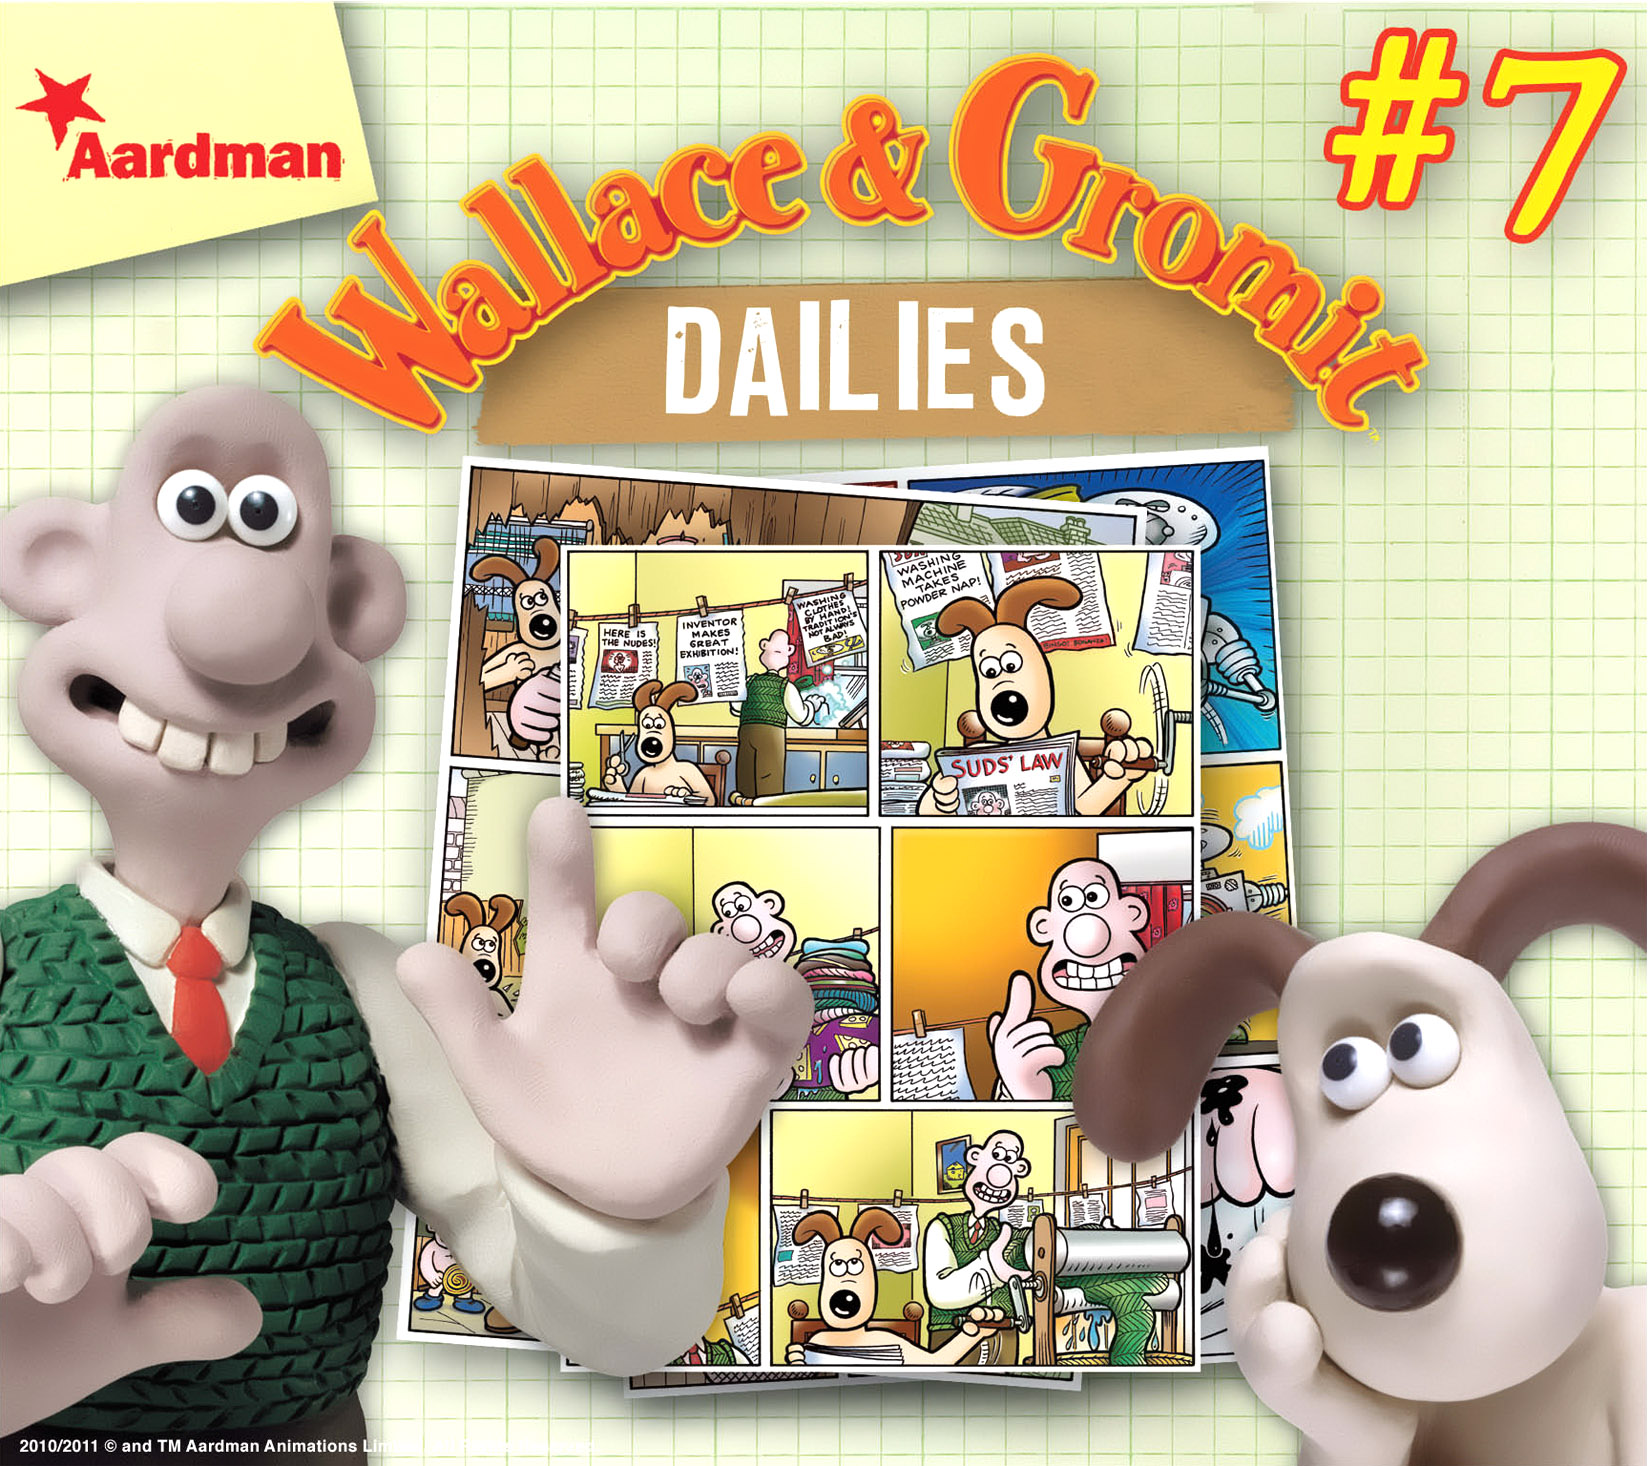 Read online Wallace & Gromit Dailies comic -  Issue #7 - 1